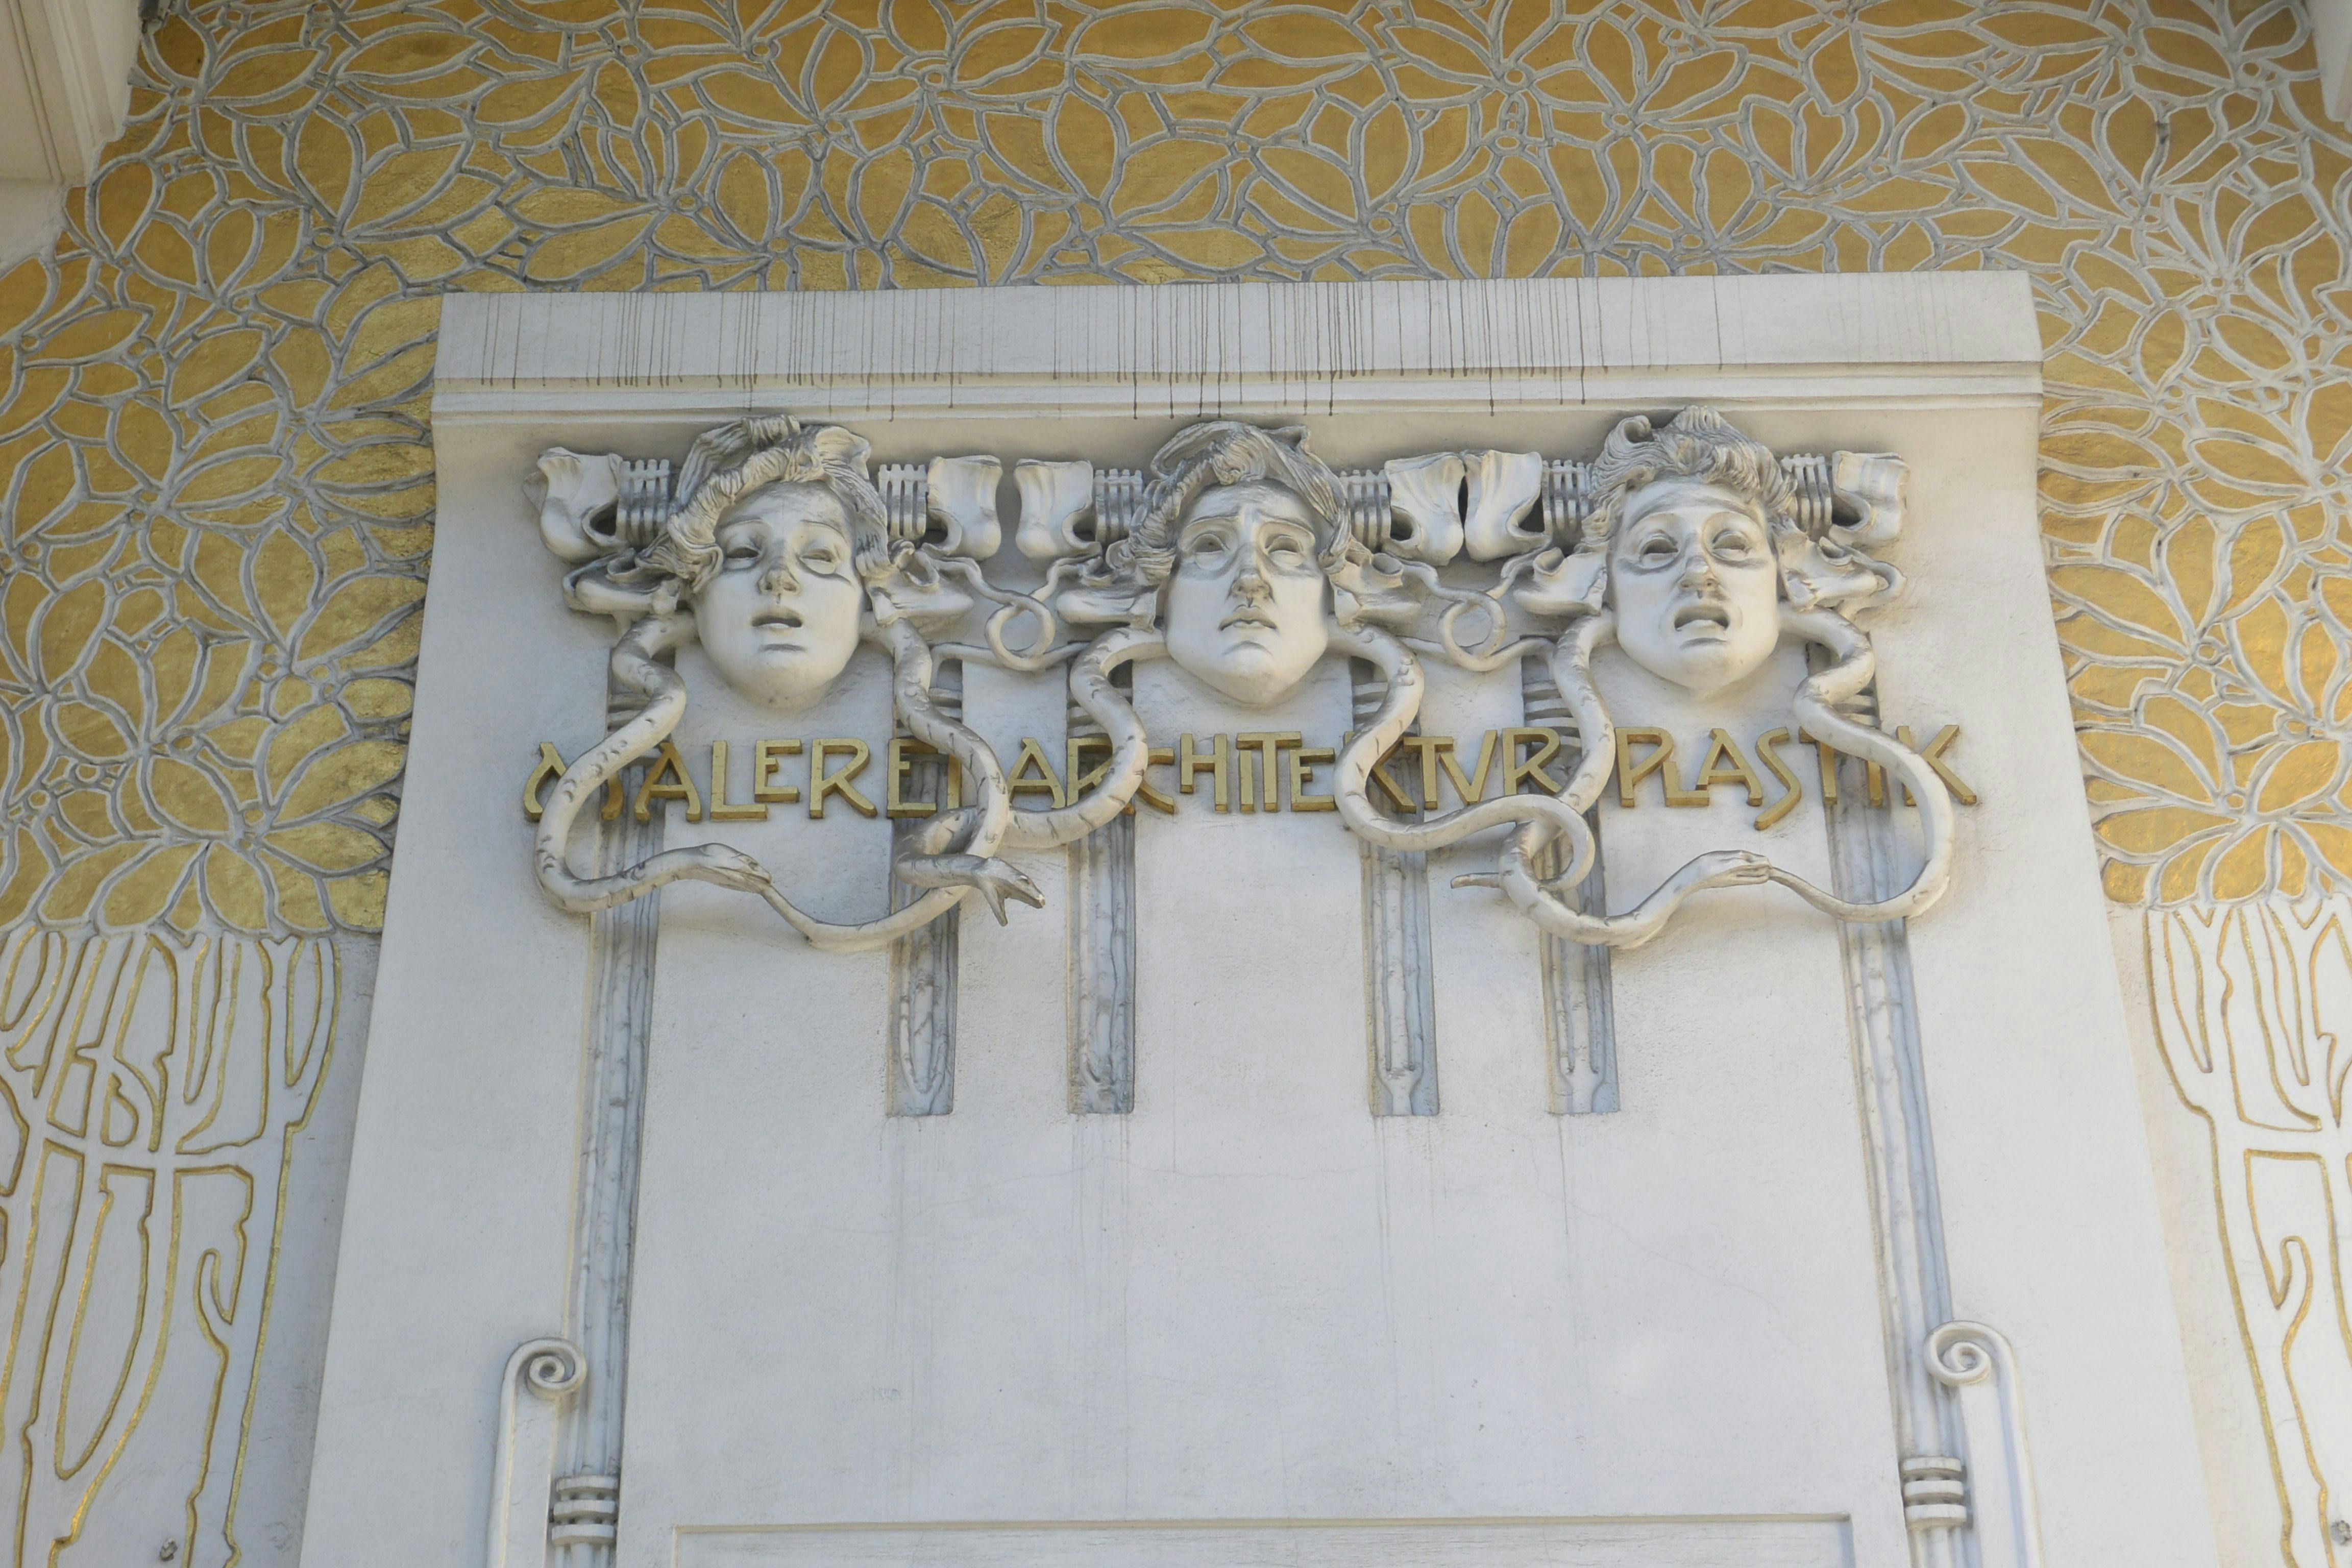 Vienna Art Nouveau and Otto Wagner walking tour with a historian Musement